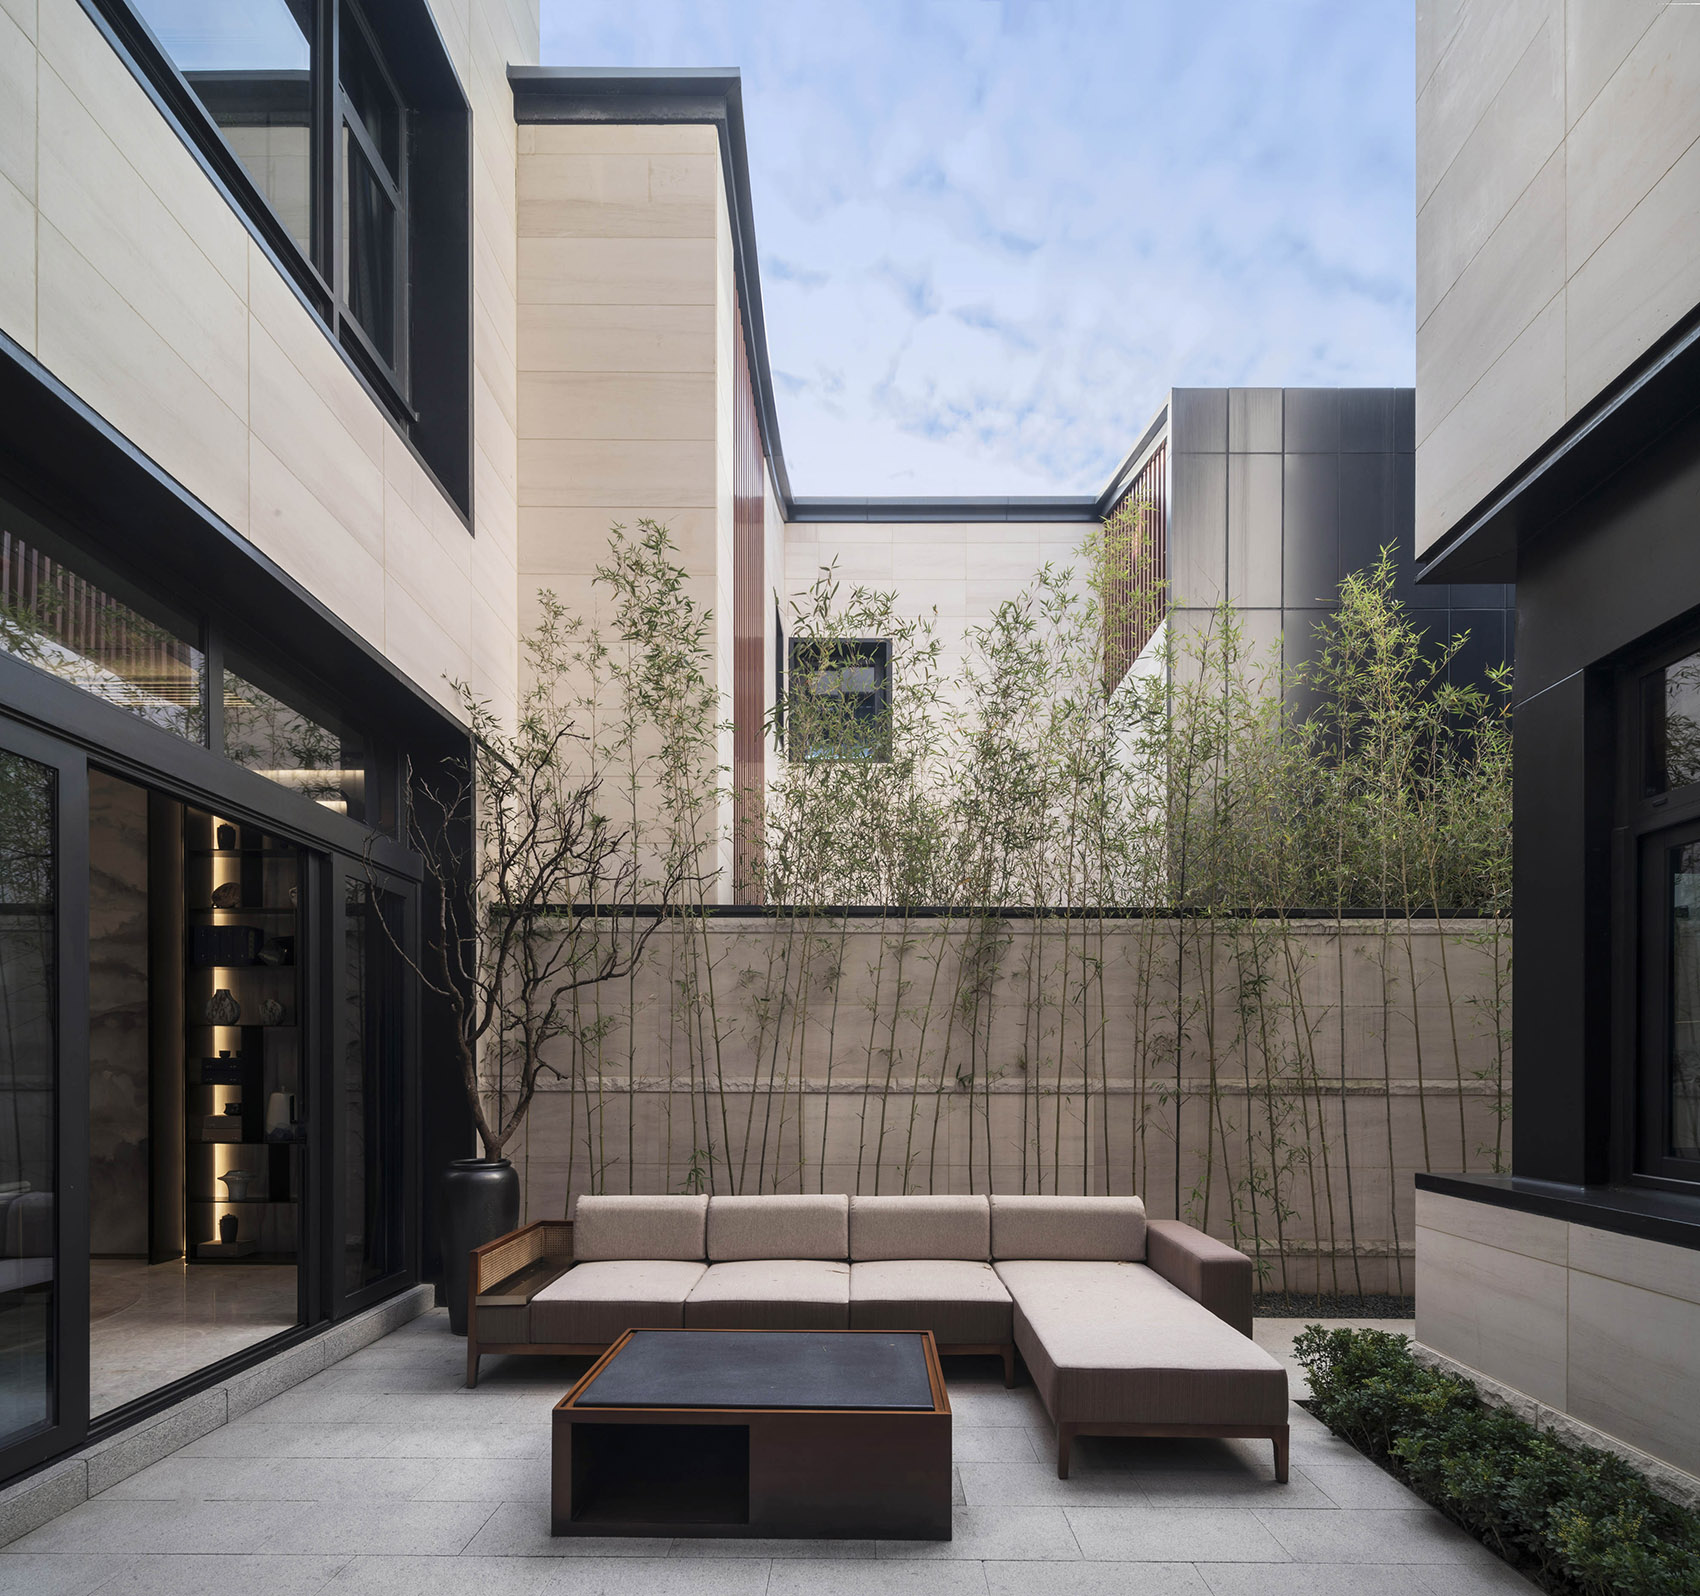 036-cangxia-renovation-project-by-jund-architects.jpg